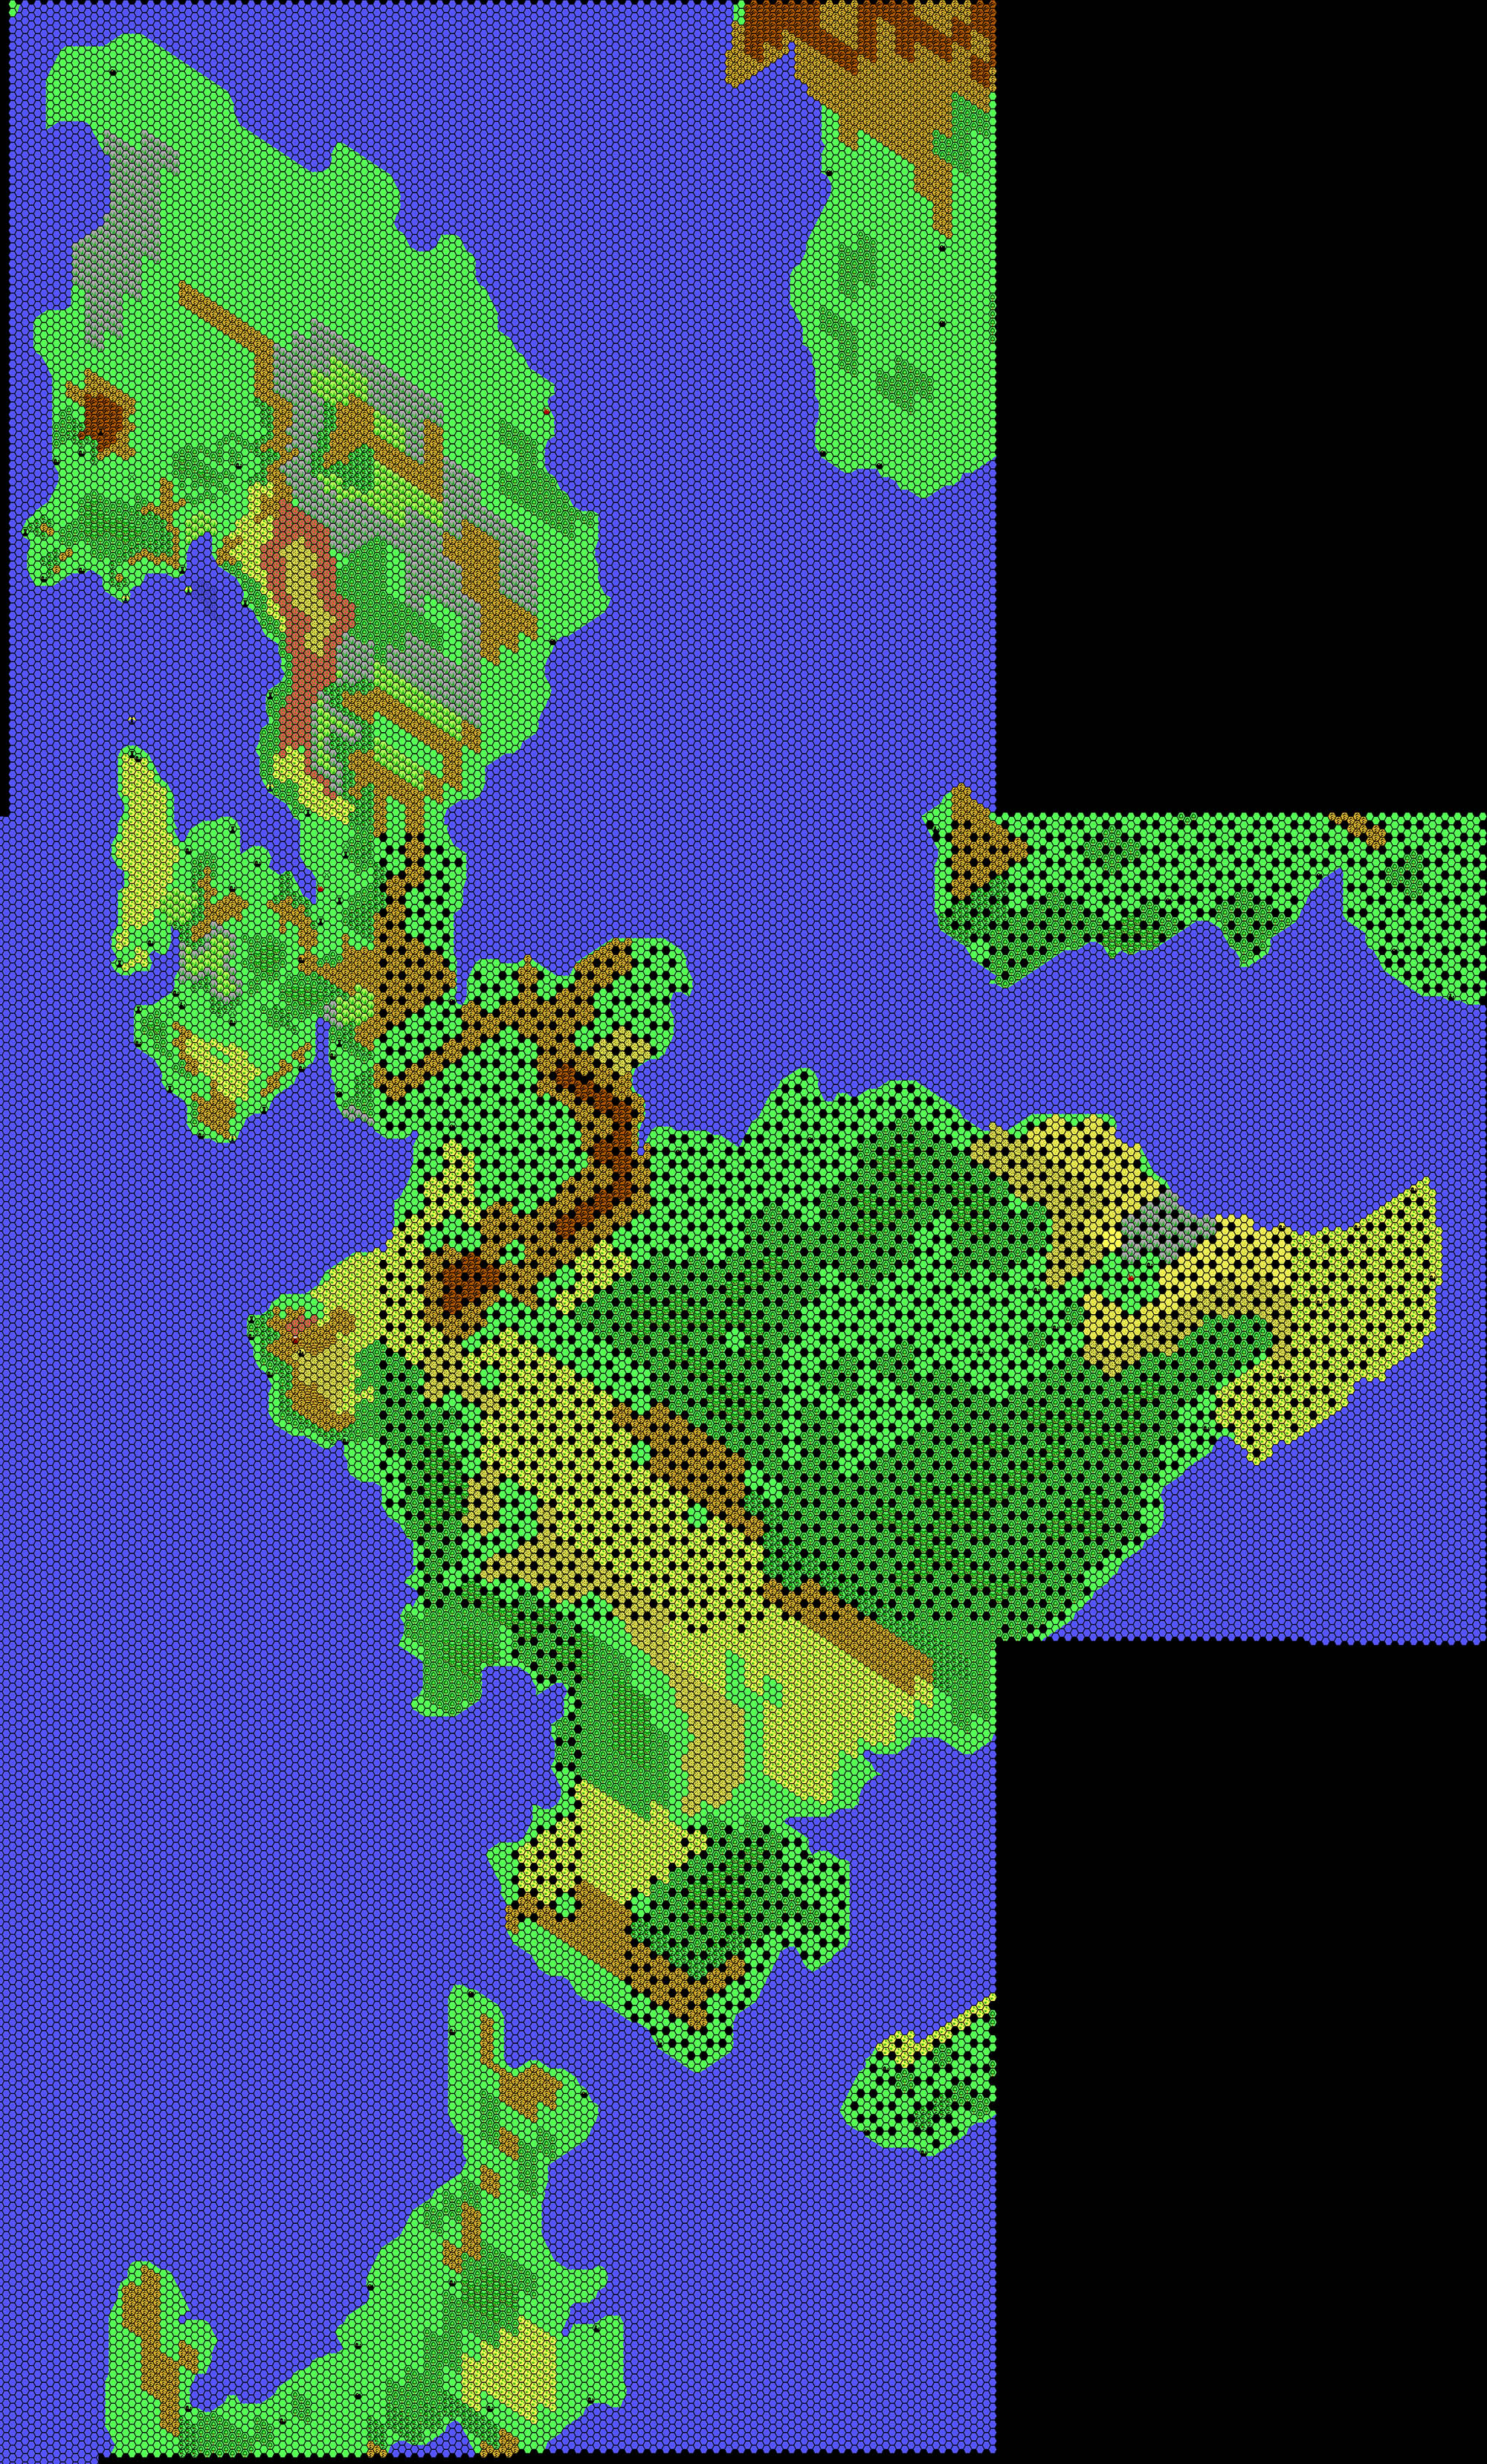 Isle of Dawn, 8 miles per hex by Thibault Sarlat, April 2001 (Revised by Thorfinn Tait, November 2021)